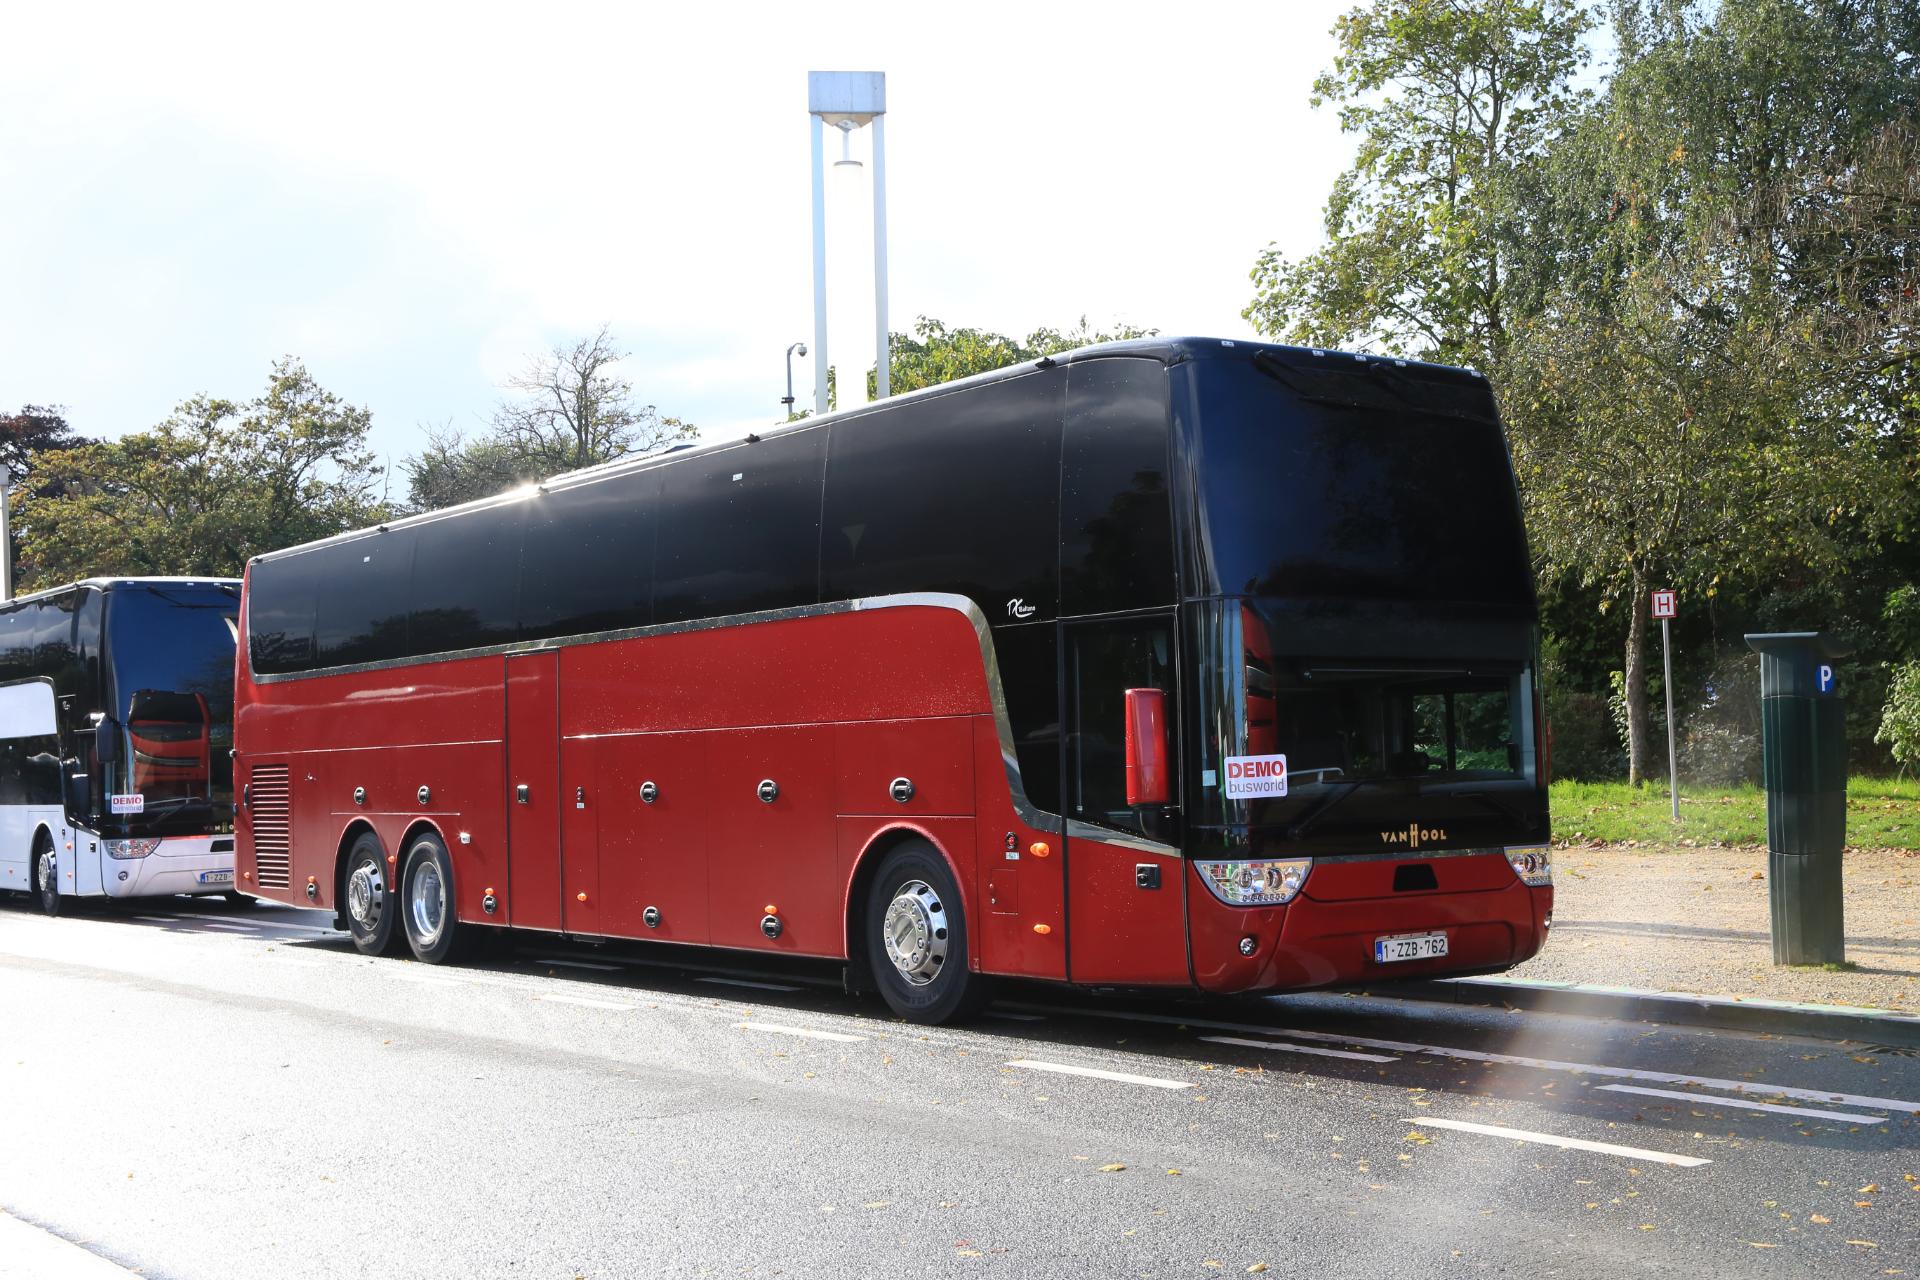 Van Hool collapses – ‘What remains now is the memory’